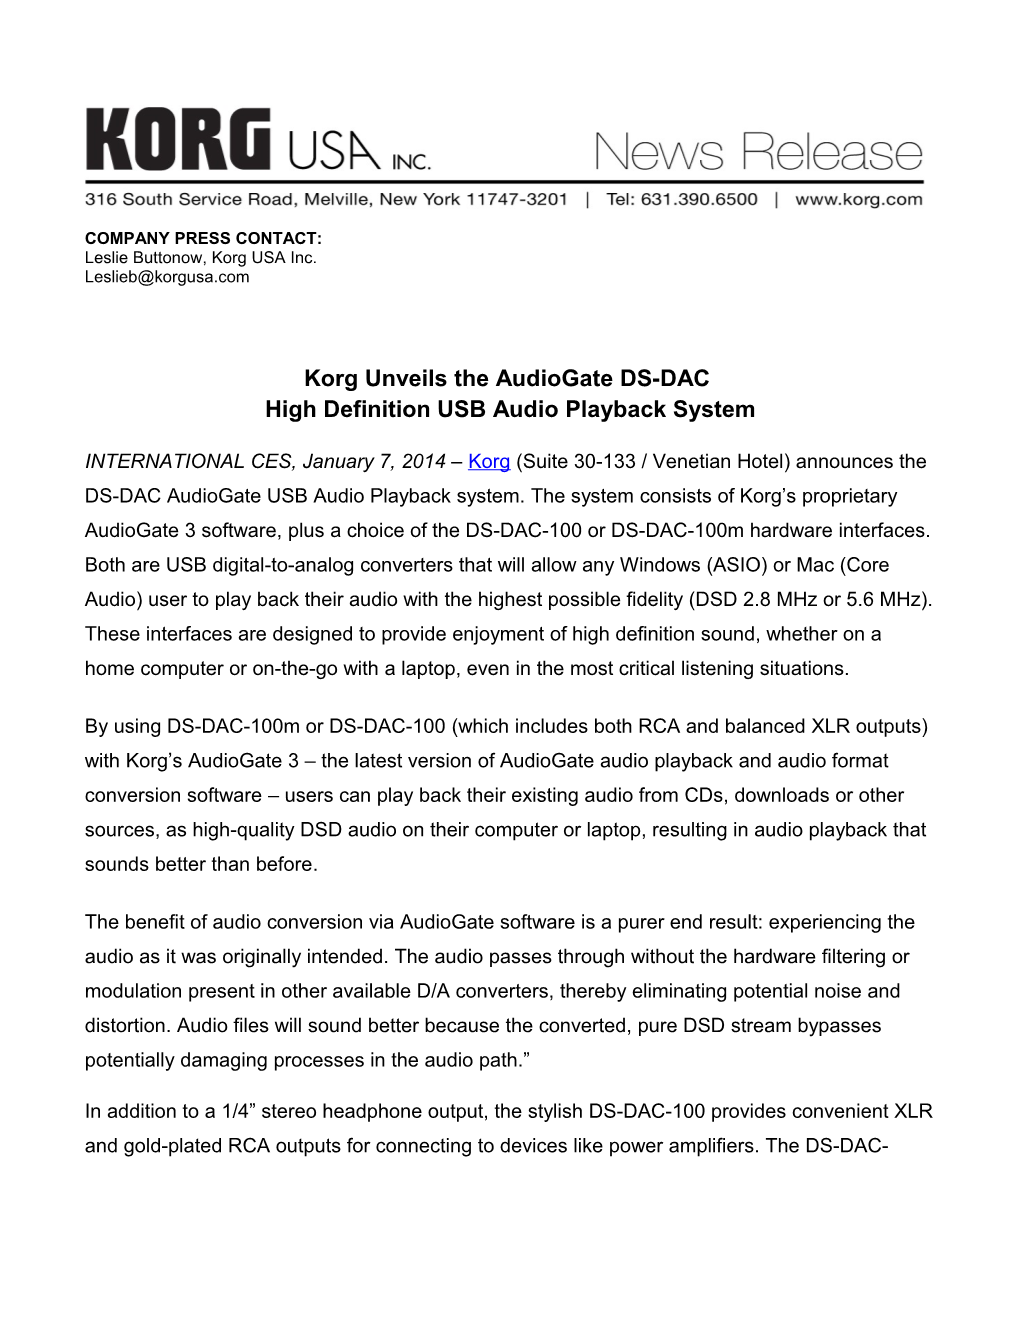 Korg Unveils the Audiogate DS-DAC